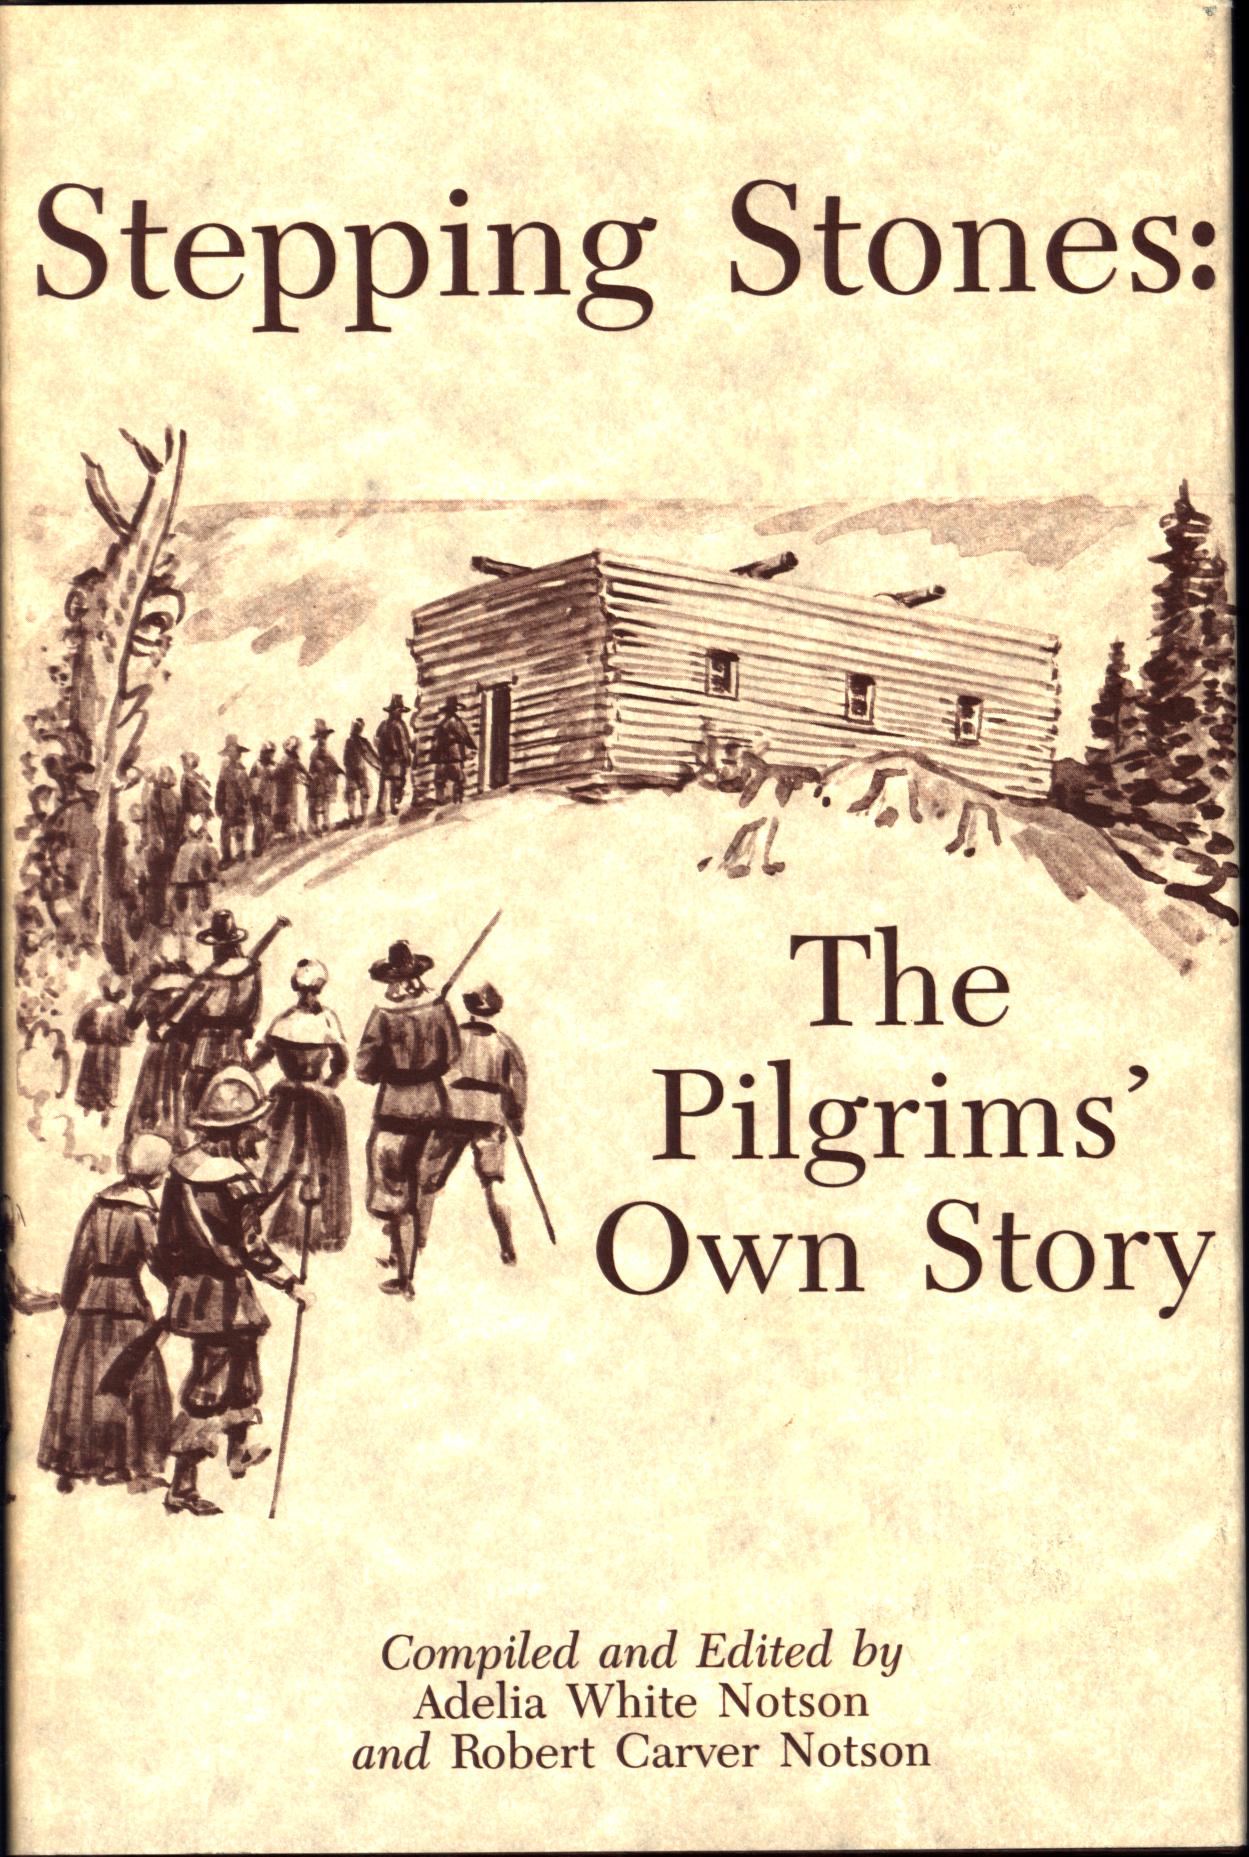 stepping stones: the Pilgrims' own story